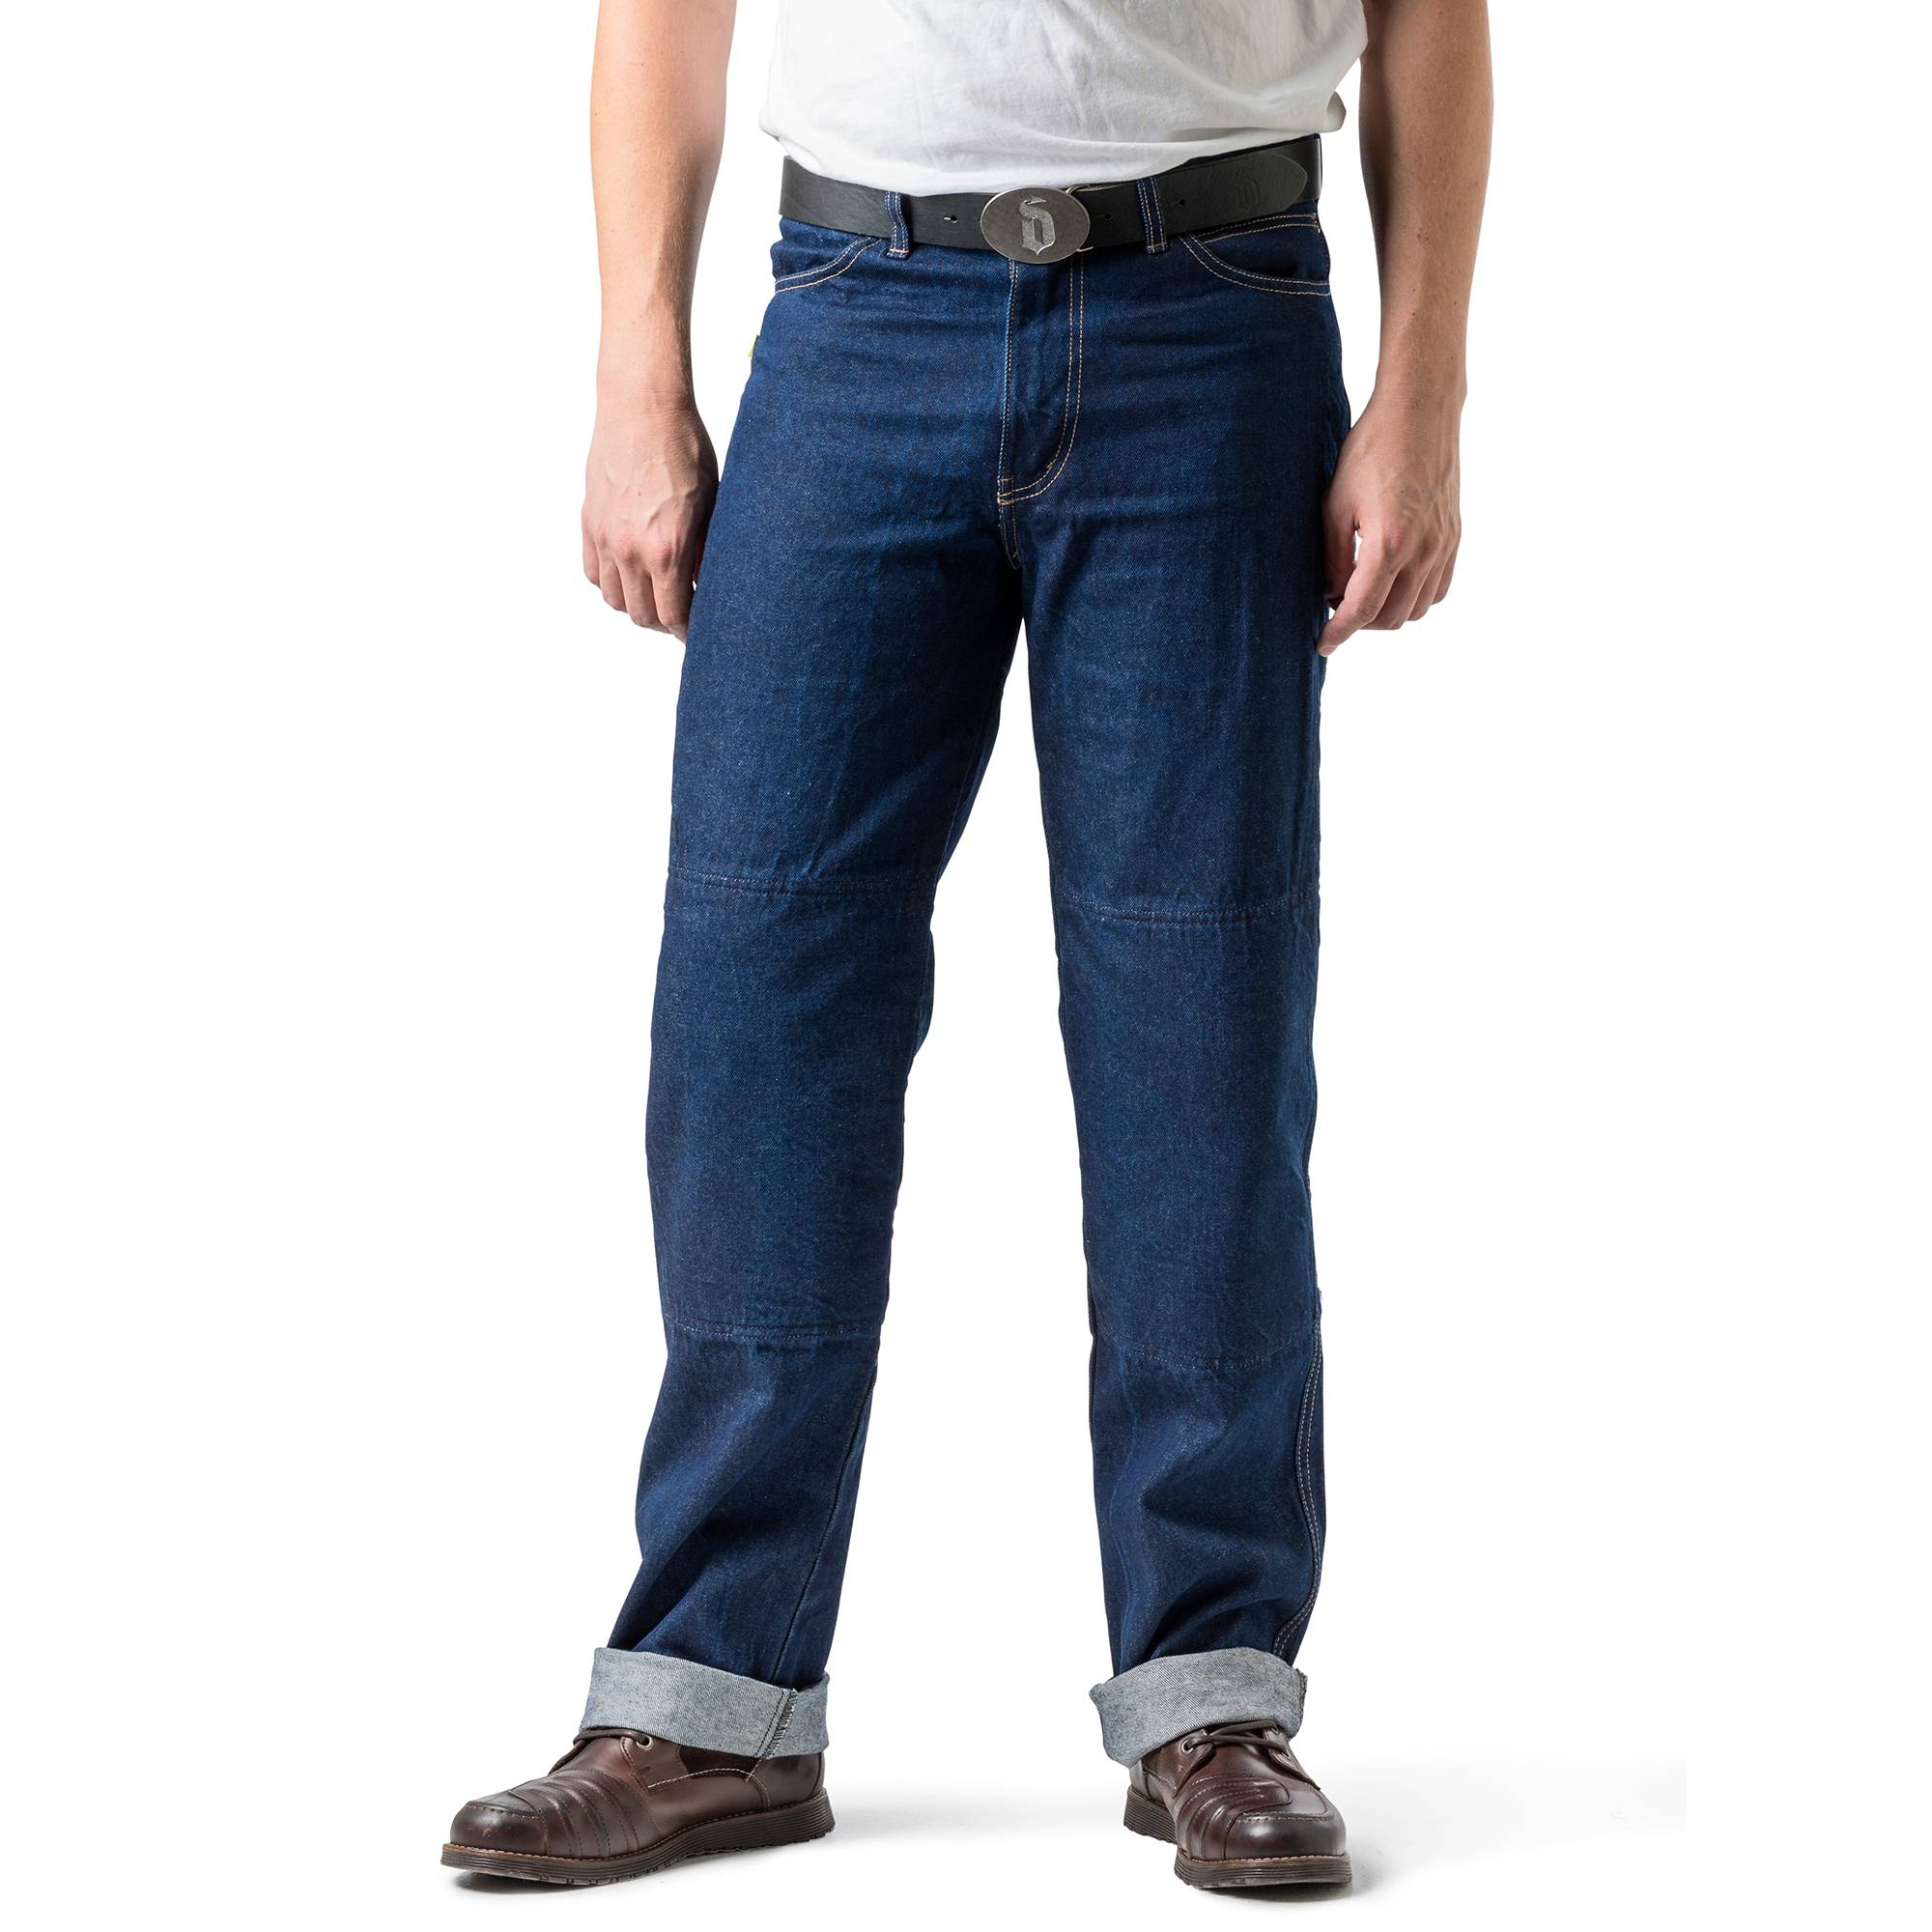 extra tall mens jeans